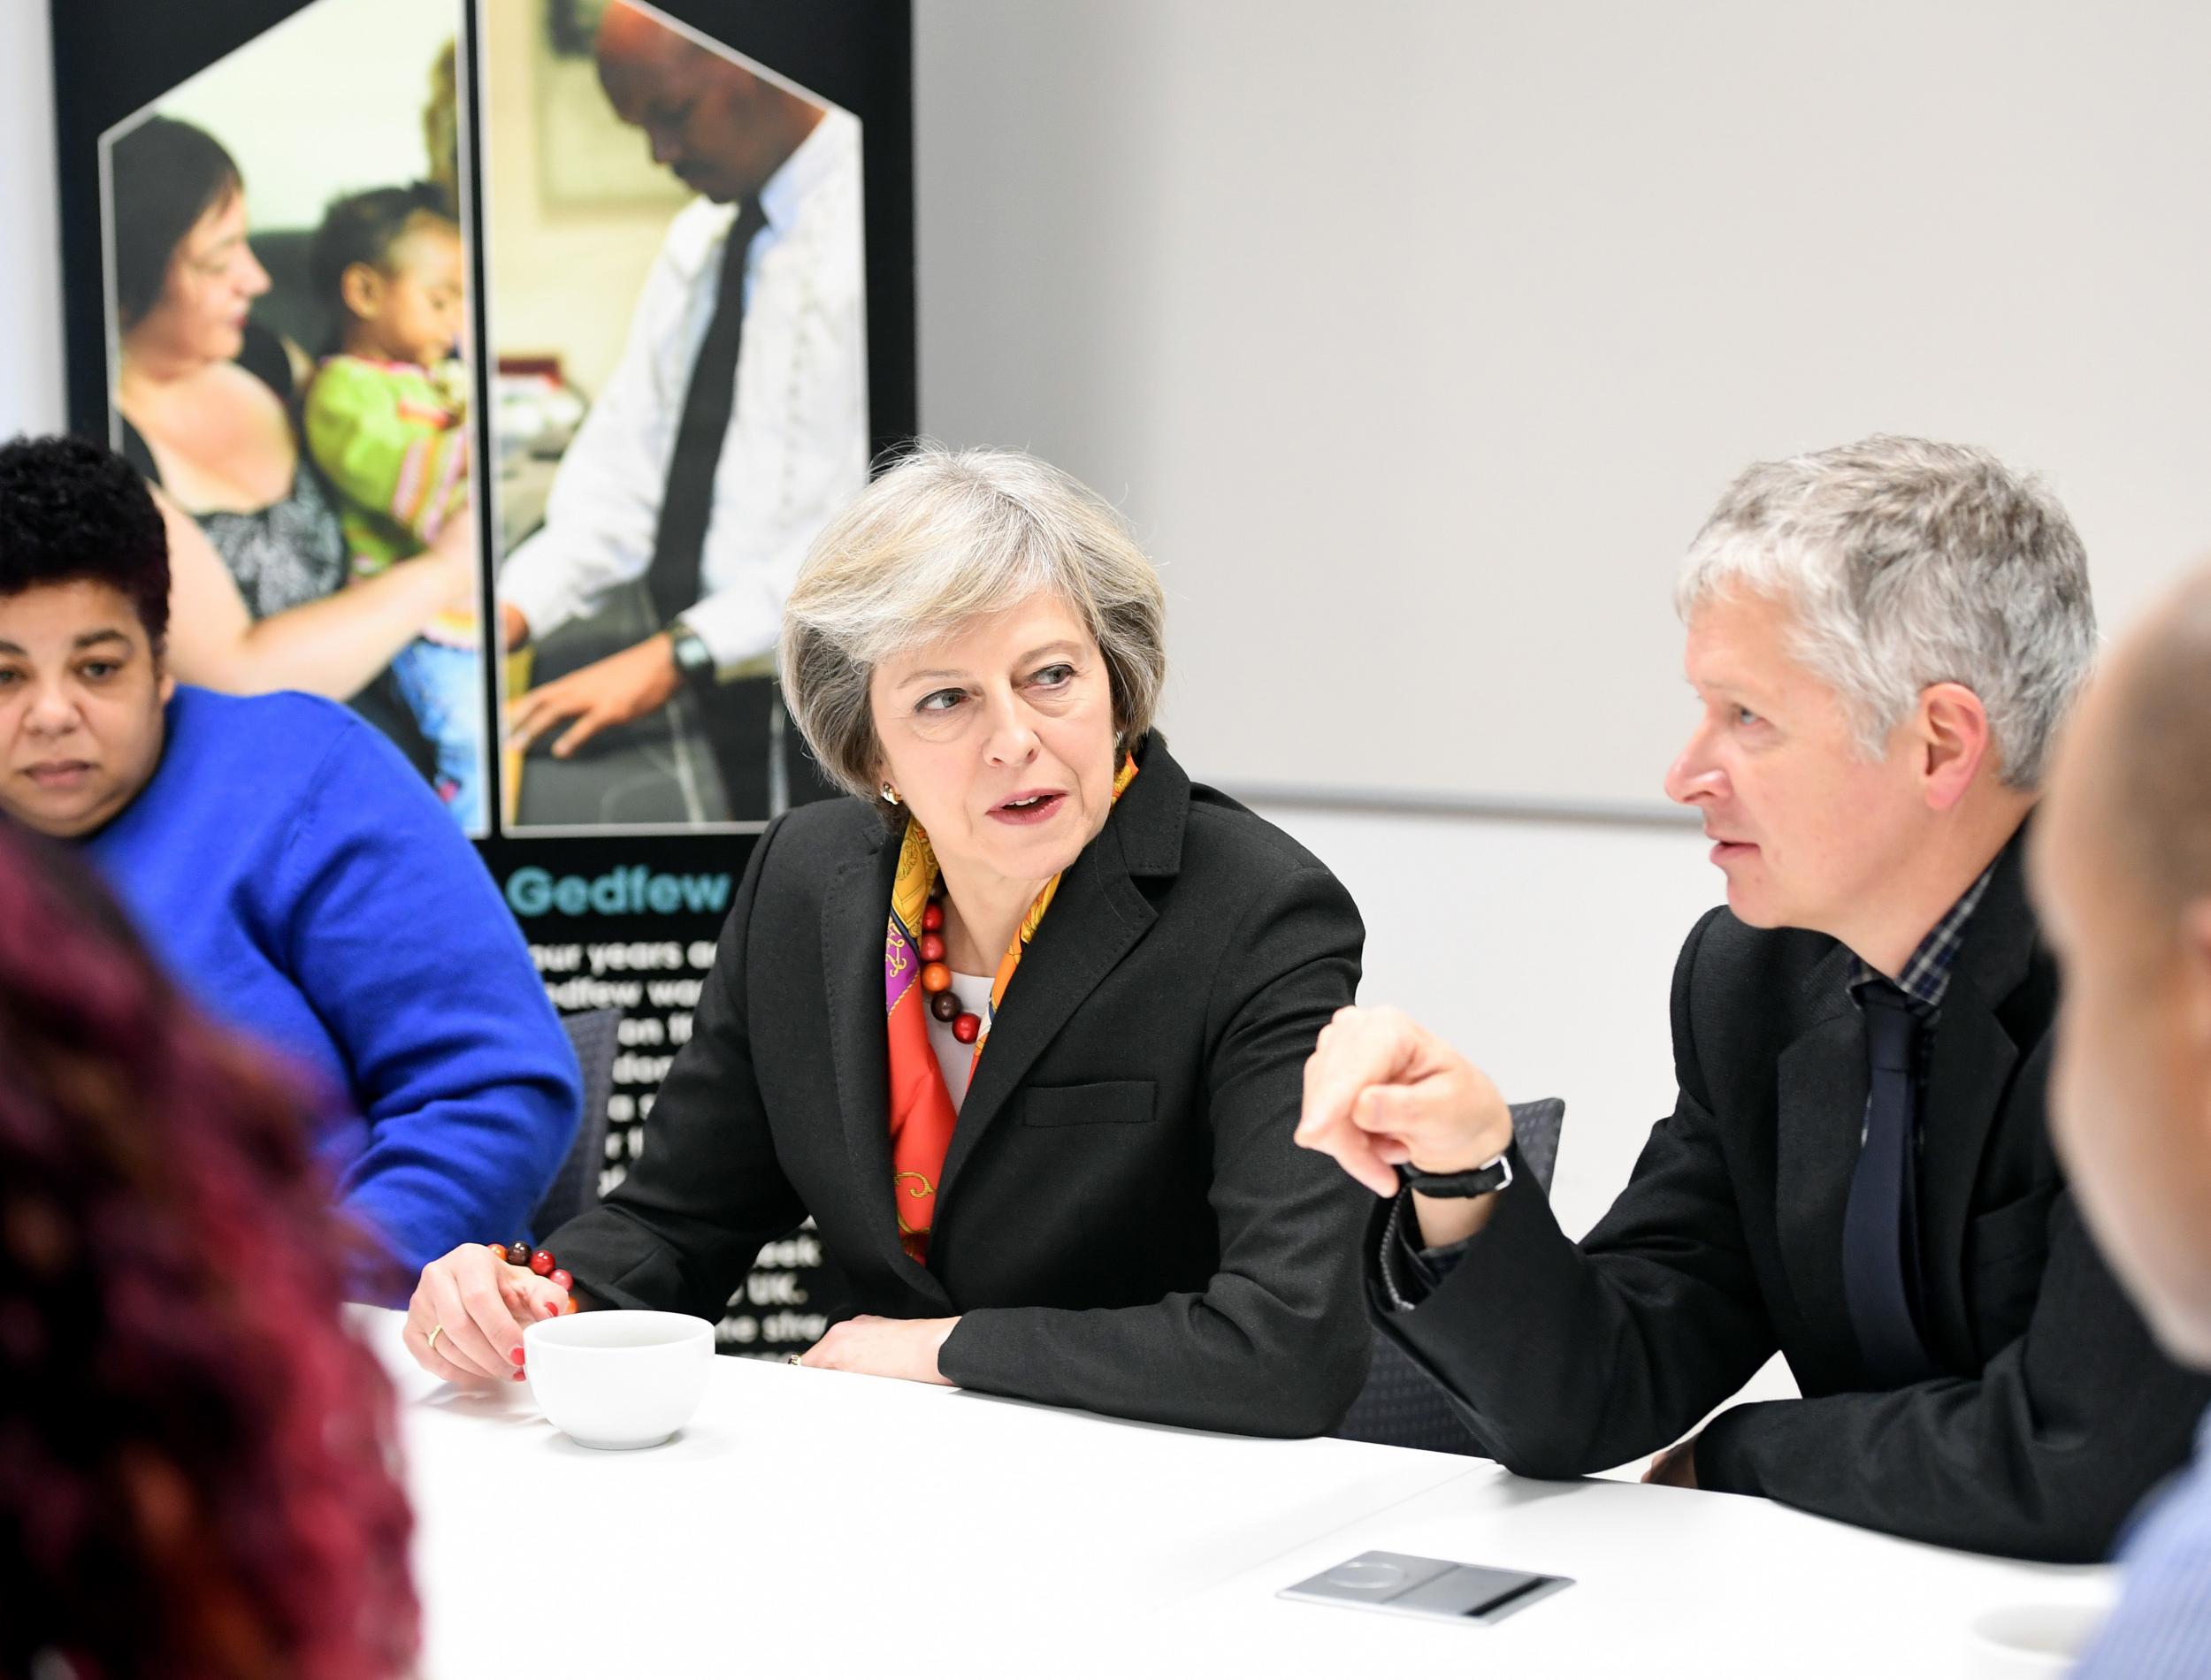 Prime Minister Theresa May during visit to Thames Reach Employment Academy centre, South East London, which helps people who are homeless or at risk of homelessness to find employment